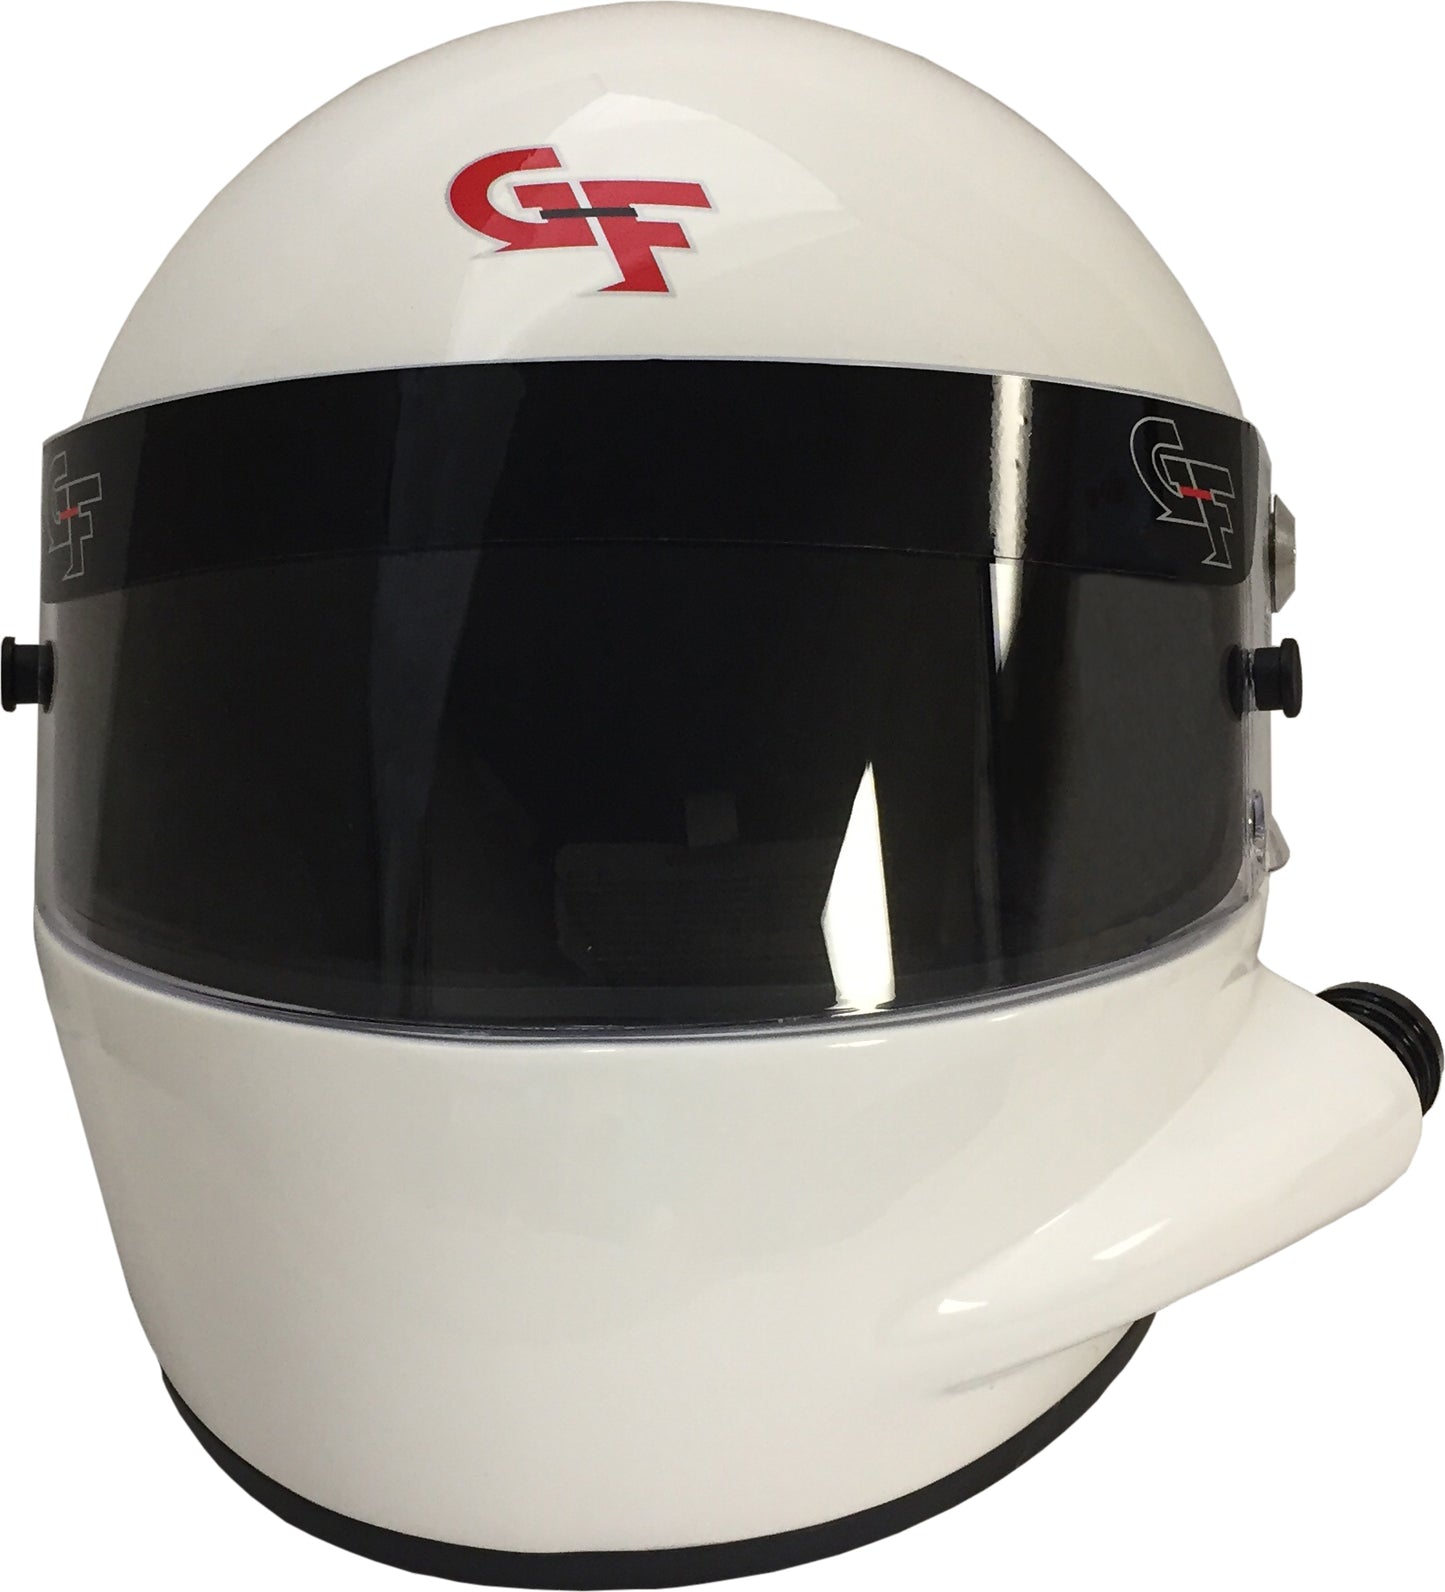 G-FORCE Racing Gear GF7 FULL FACE SML WHITE SA15 3127SMLWH